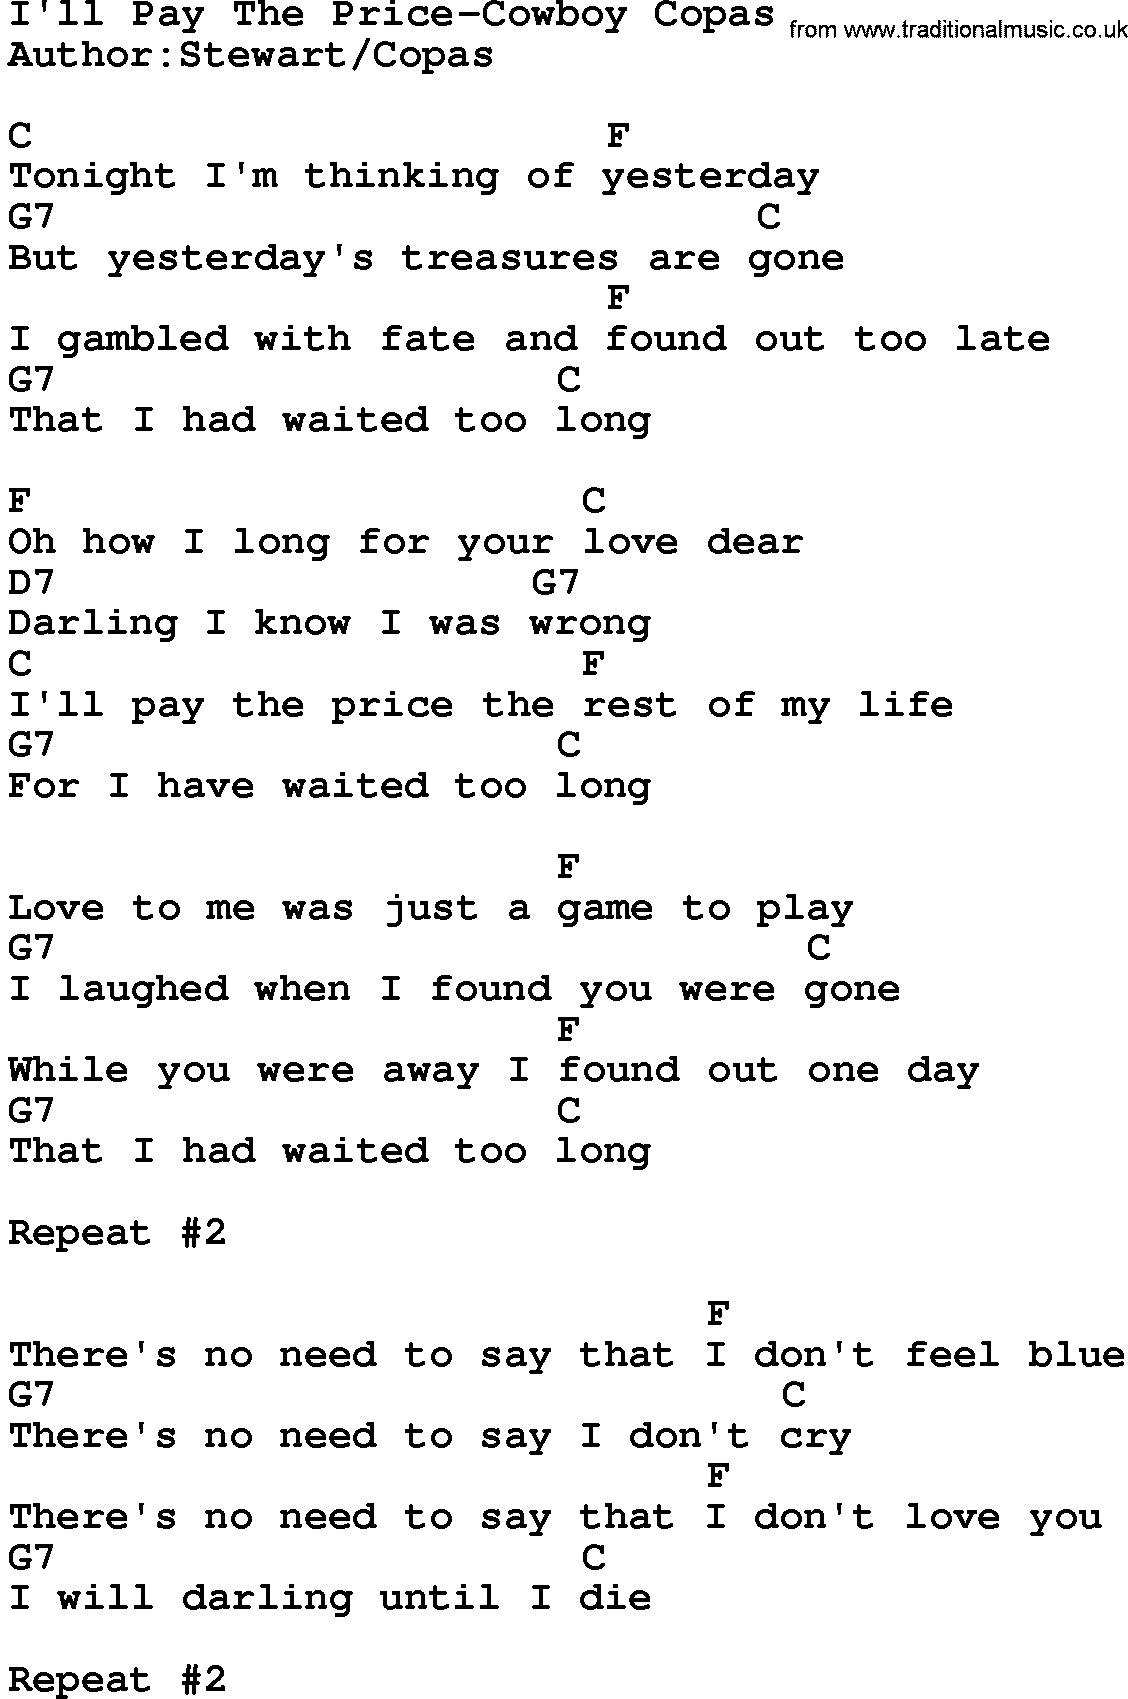 Country music song: I'll Pay The Price-Cowboy Copas lyrics and chords